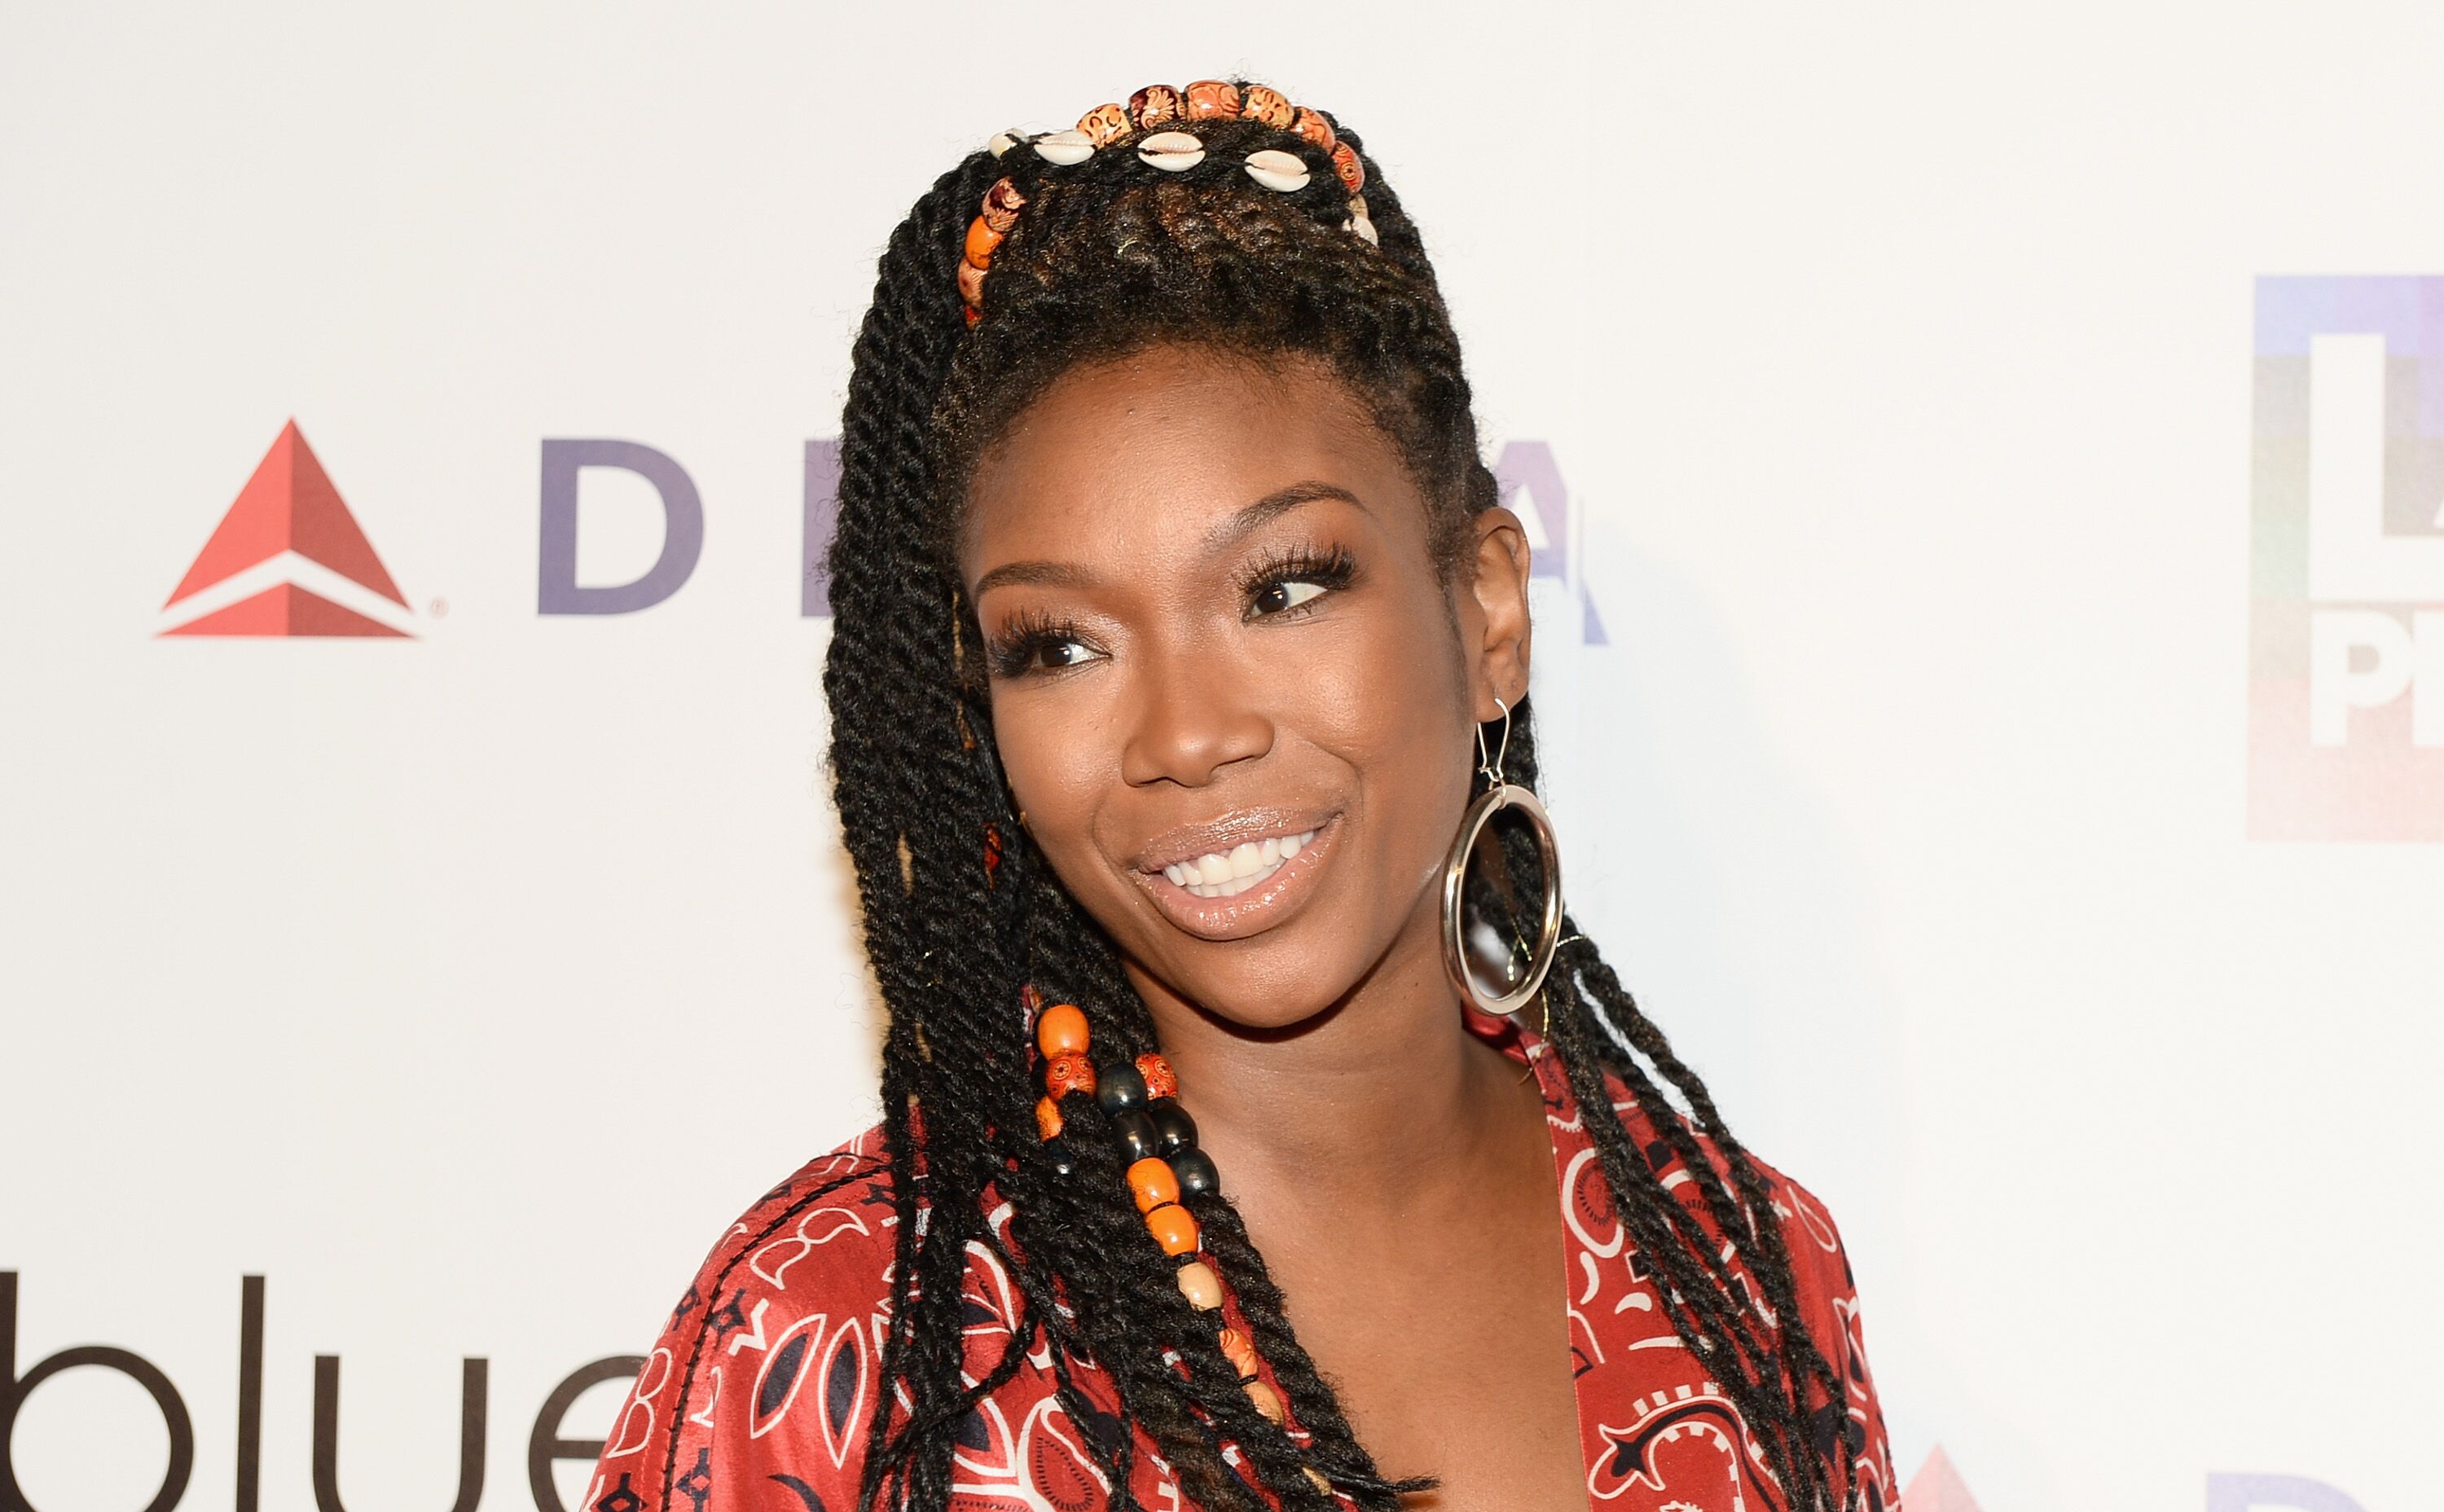 Brandy Norwood attends the LA Pride Music Festival and Parade 2017 | Source: Getty Images